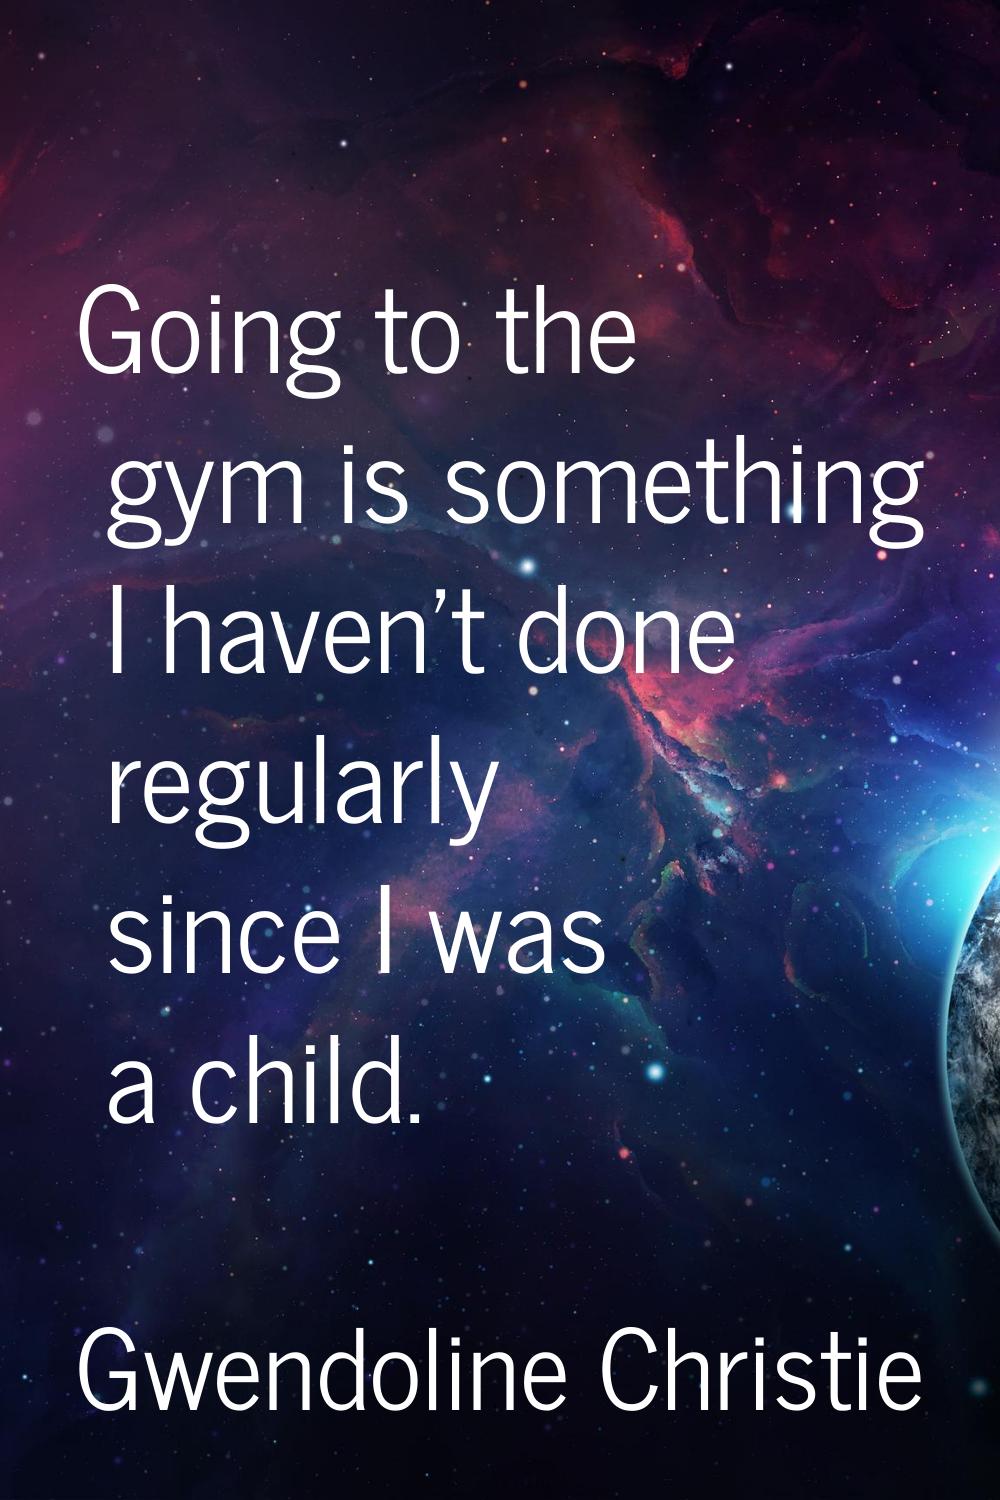 Going to the gym is something I haven't done regularly since I was a child.